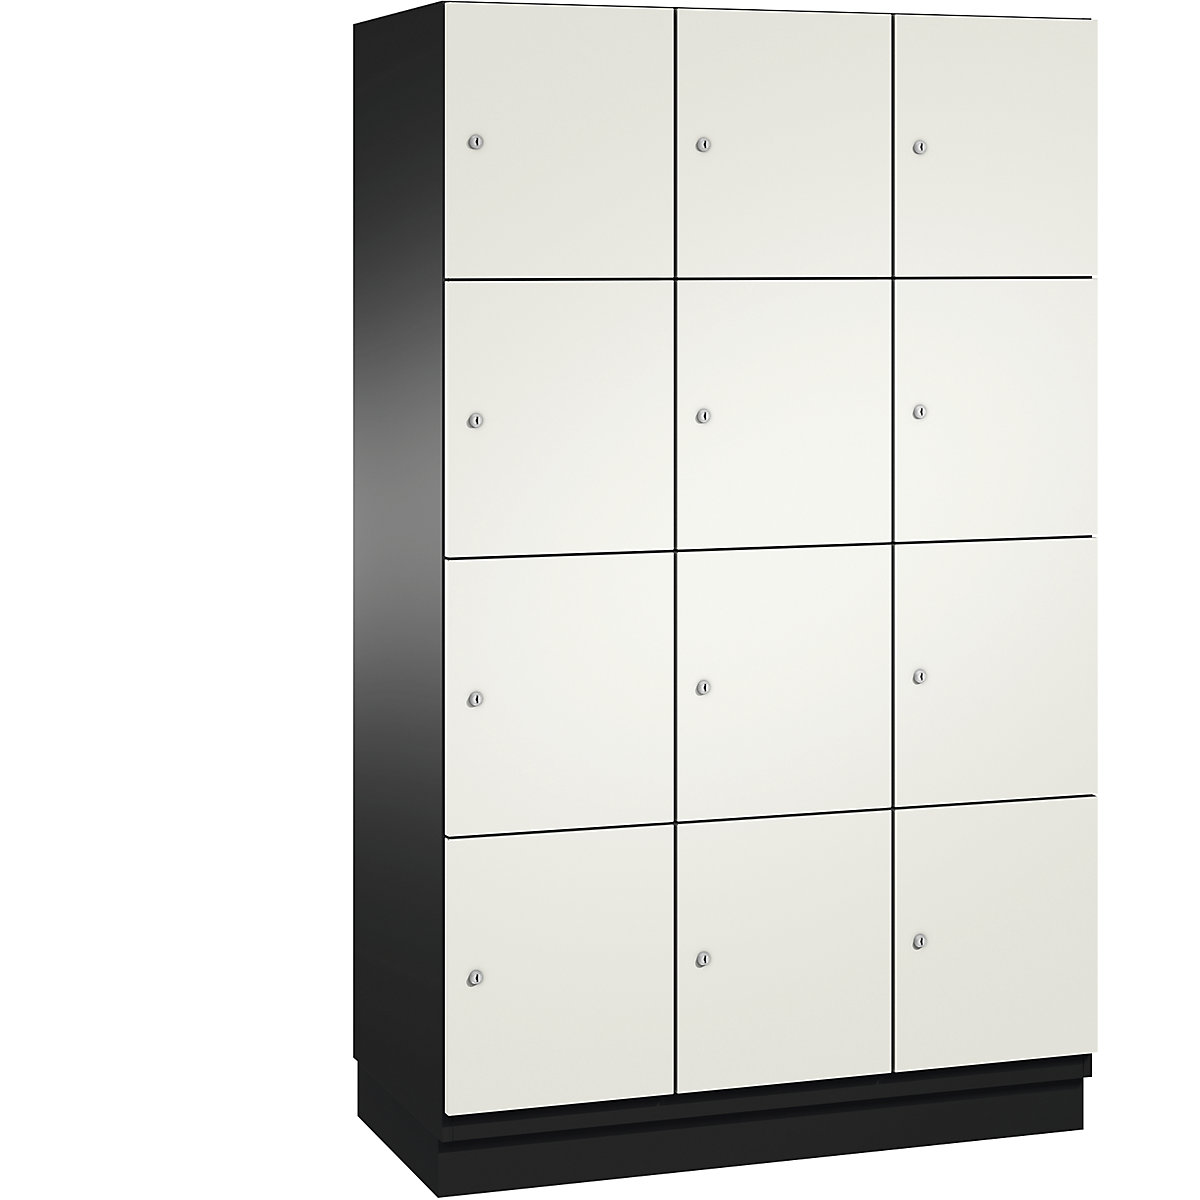 CAMBIO compartment locker with sheet steel doors – C+P, 12 compartments, width 1200 mm, body black grey / door pure white, compartment height 462.5 mm-5